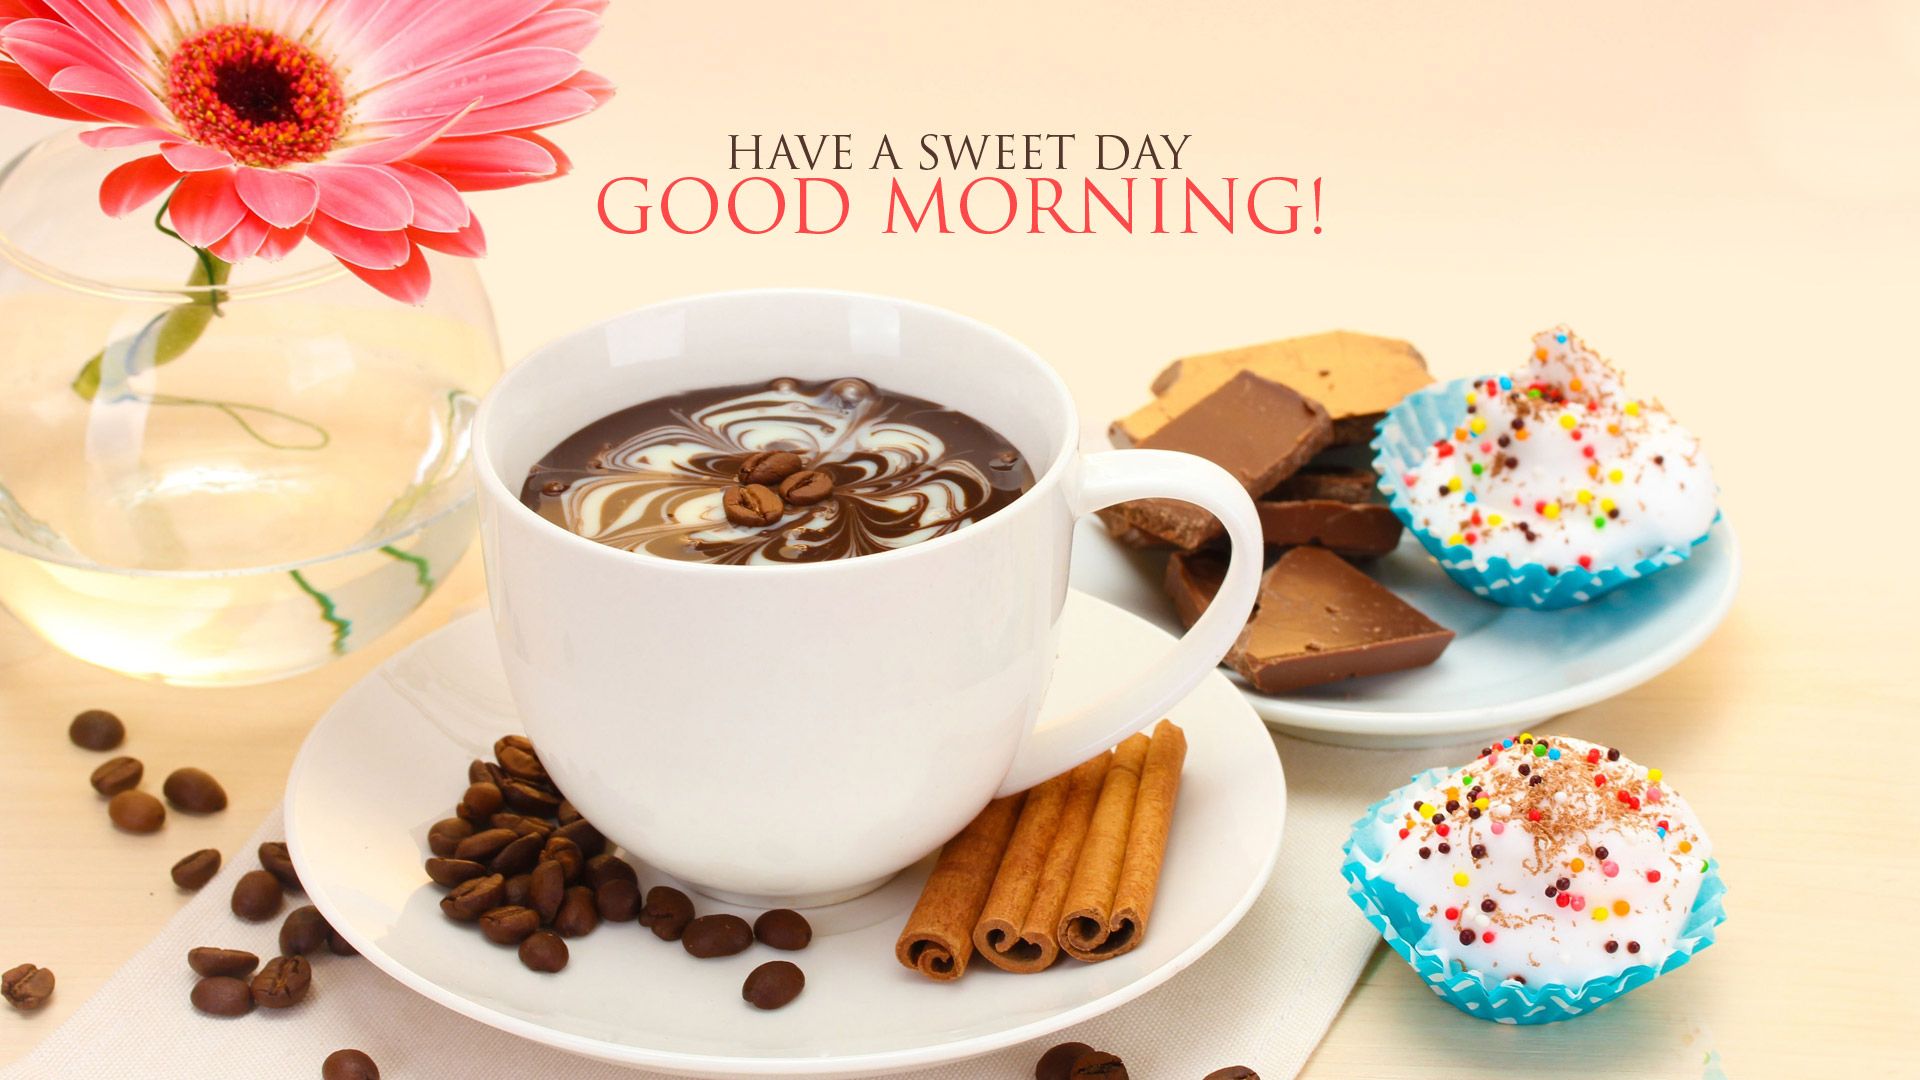 Hq Res Wallpapers Of Good Morning Hd - Sweet Good Morning Images Hd , HD Wallpaper & Backgrounds